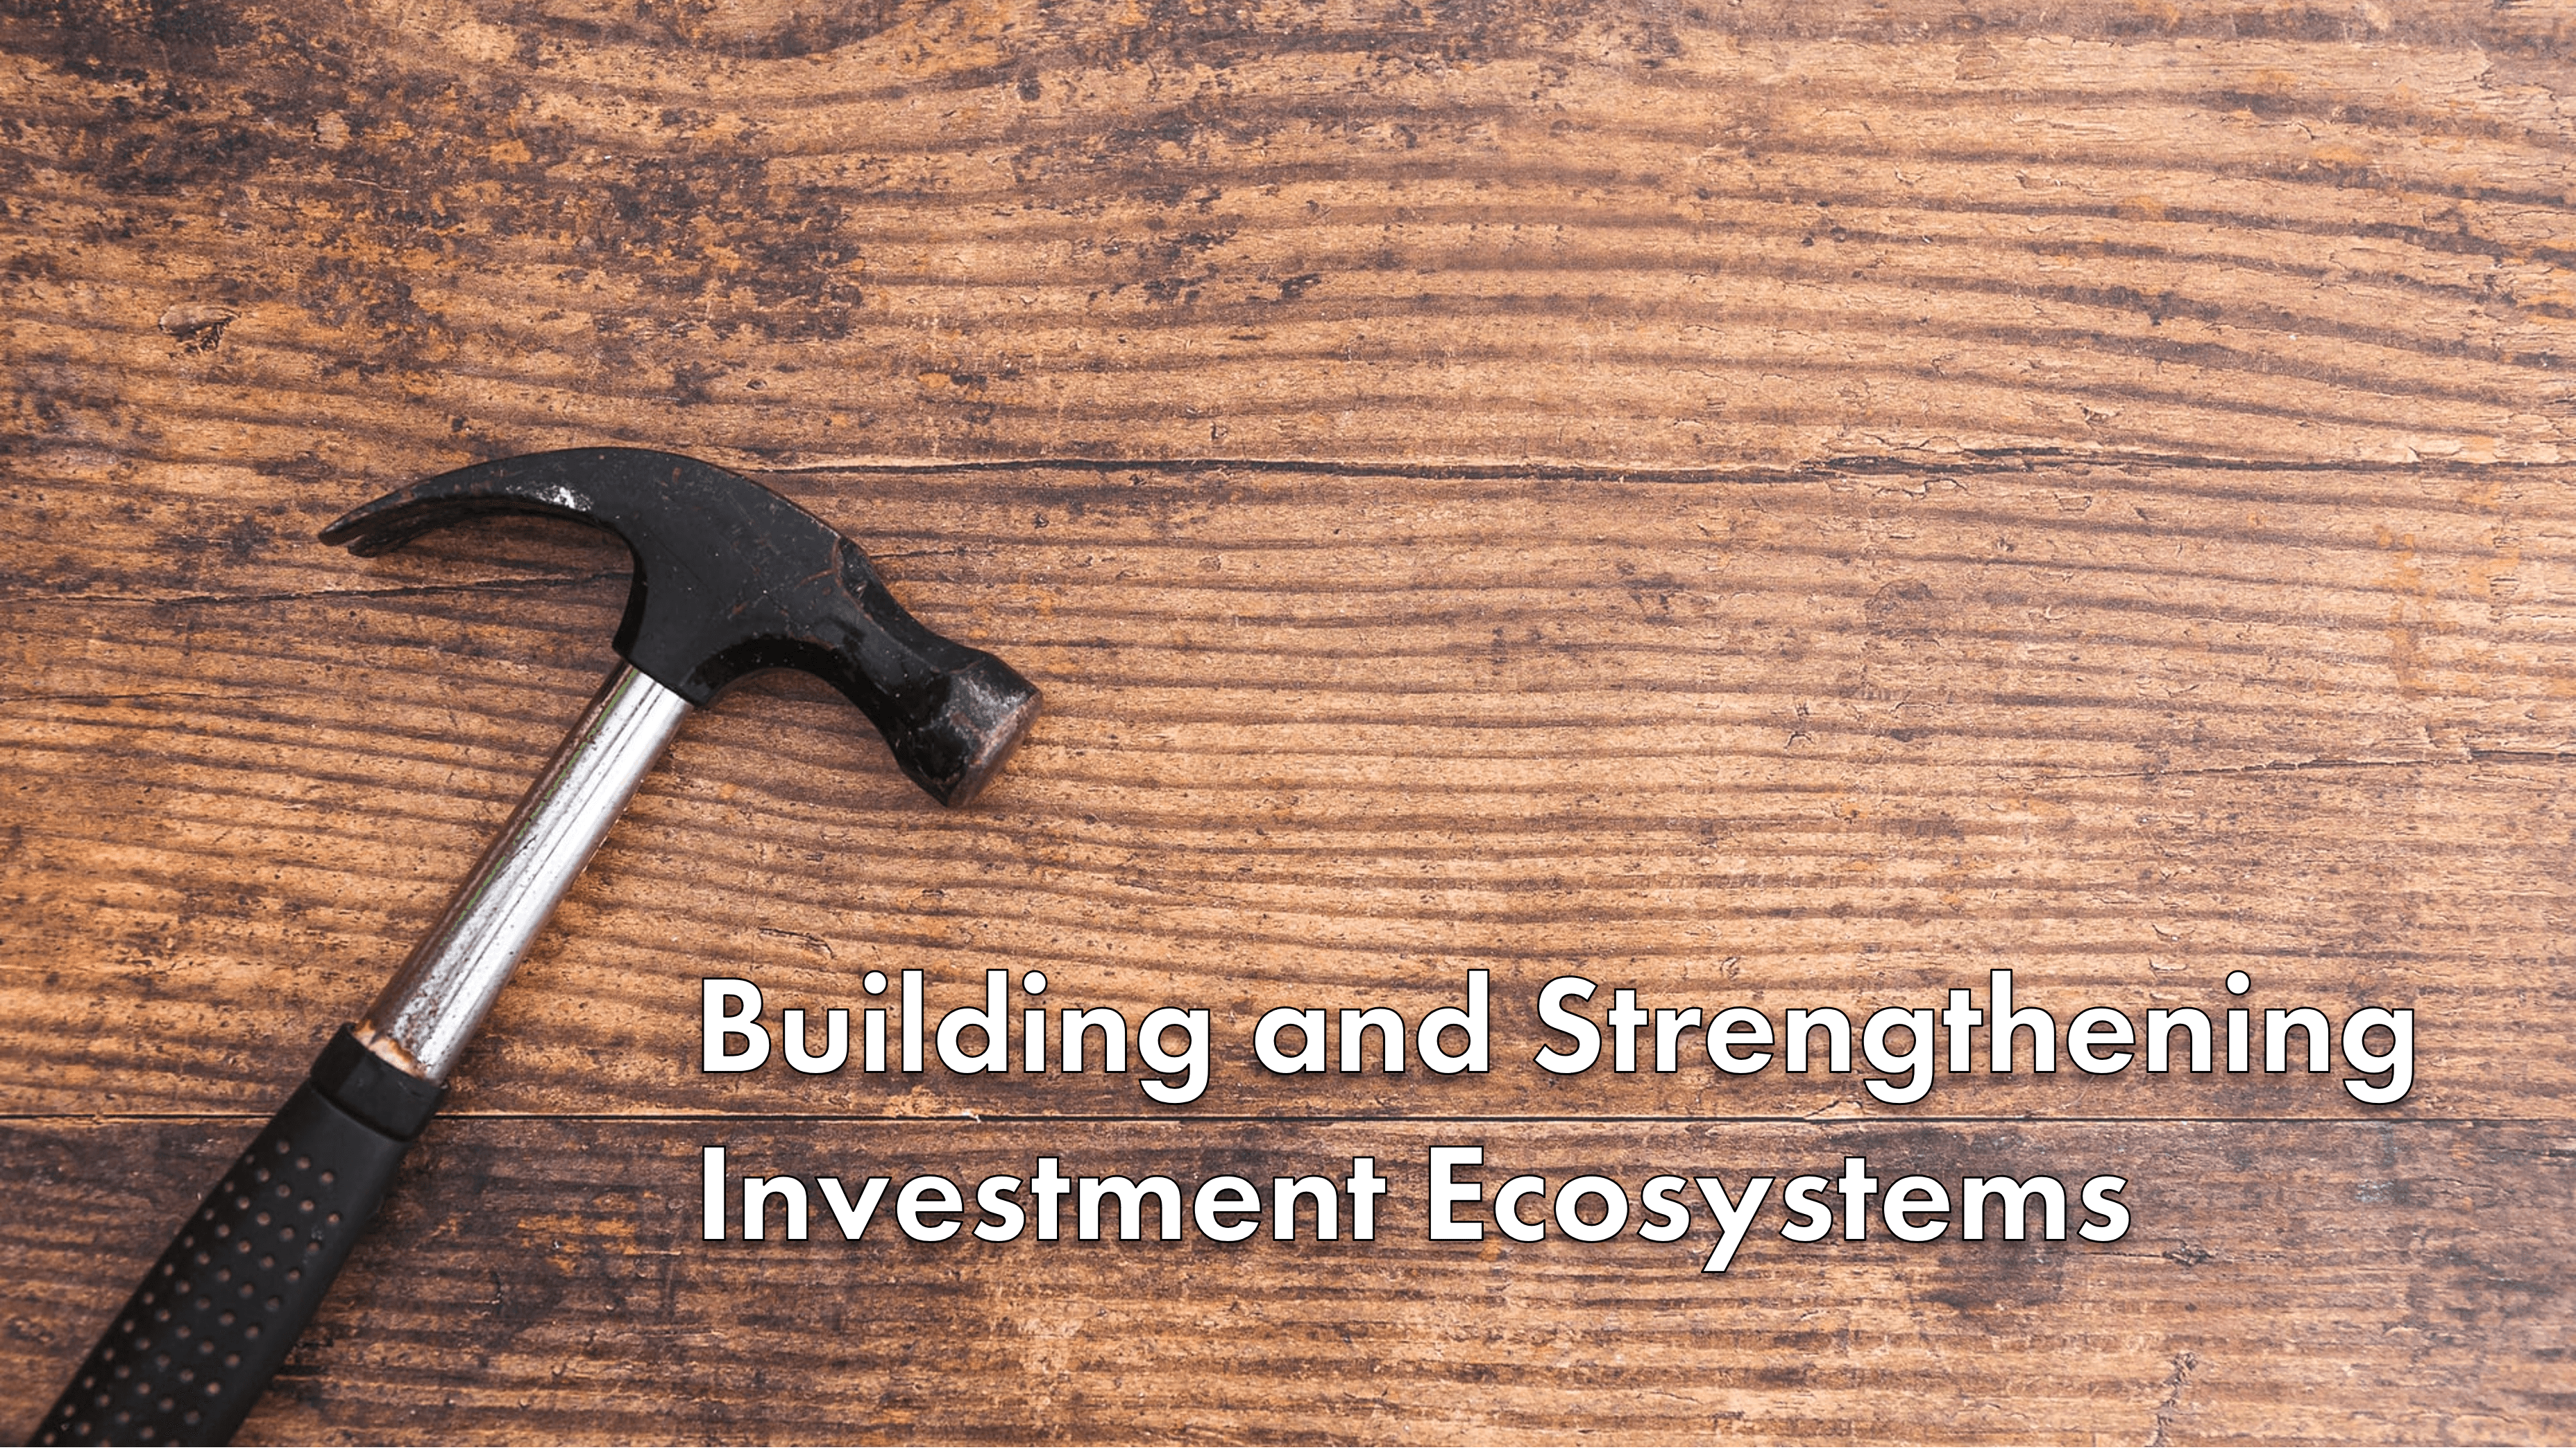 Building and Strengthening Investment Ecosystems